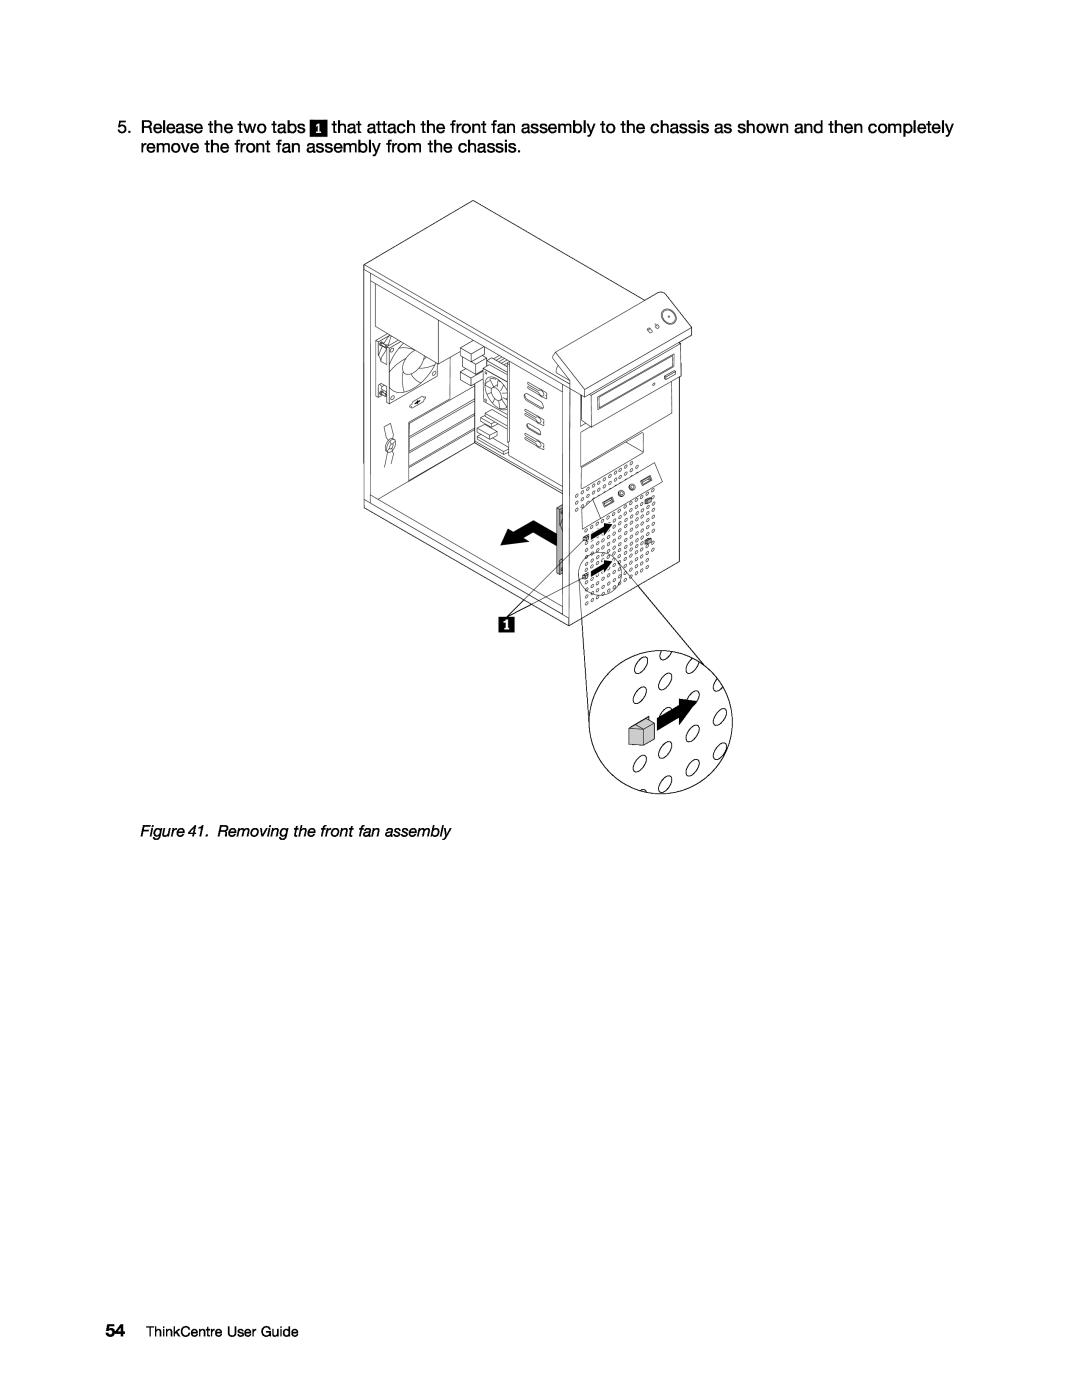 Lenovo 1982, 1993, 1995, 1986, 1985, 1987, 1994, 1983, 1990, 1992 manual Removing the front fan assembly, ThinkCentre User Guide 